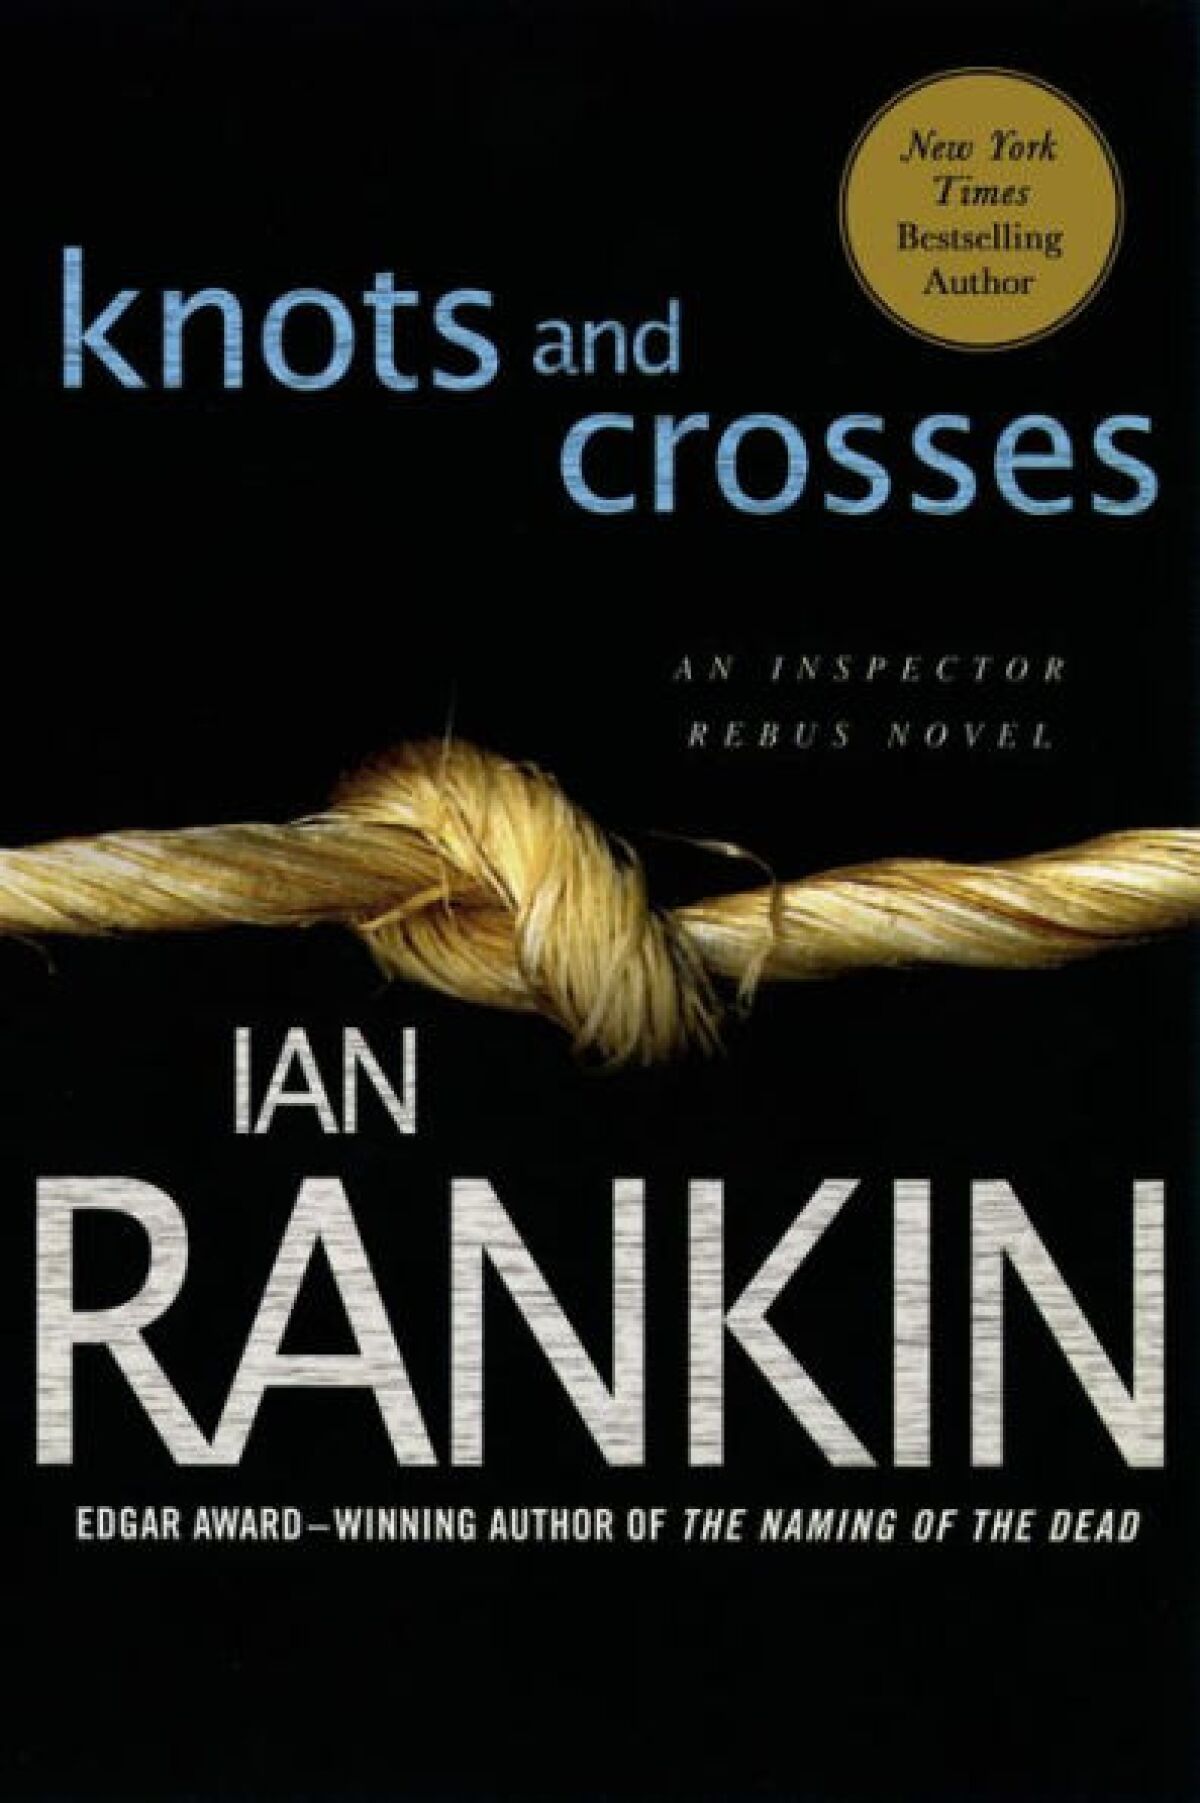 Book jacket for "Knots and Crosses: An Inspector Rebus Novel" by Ian Rankin.